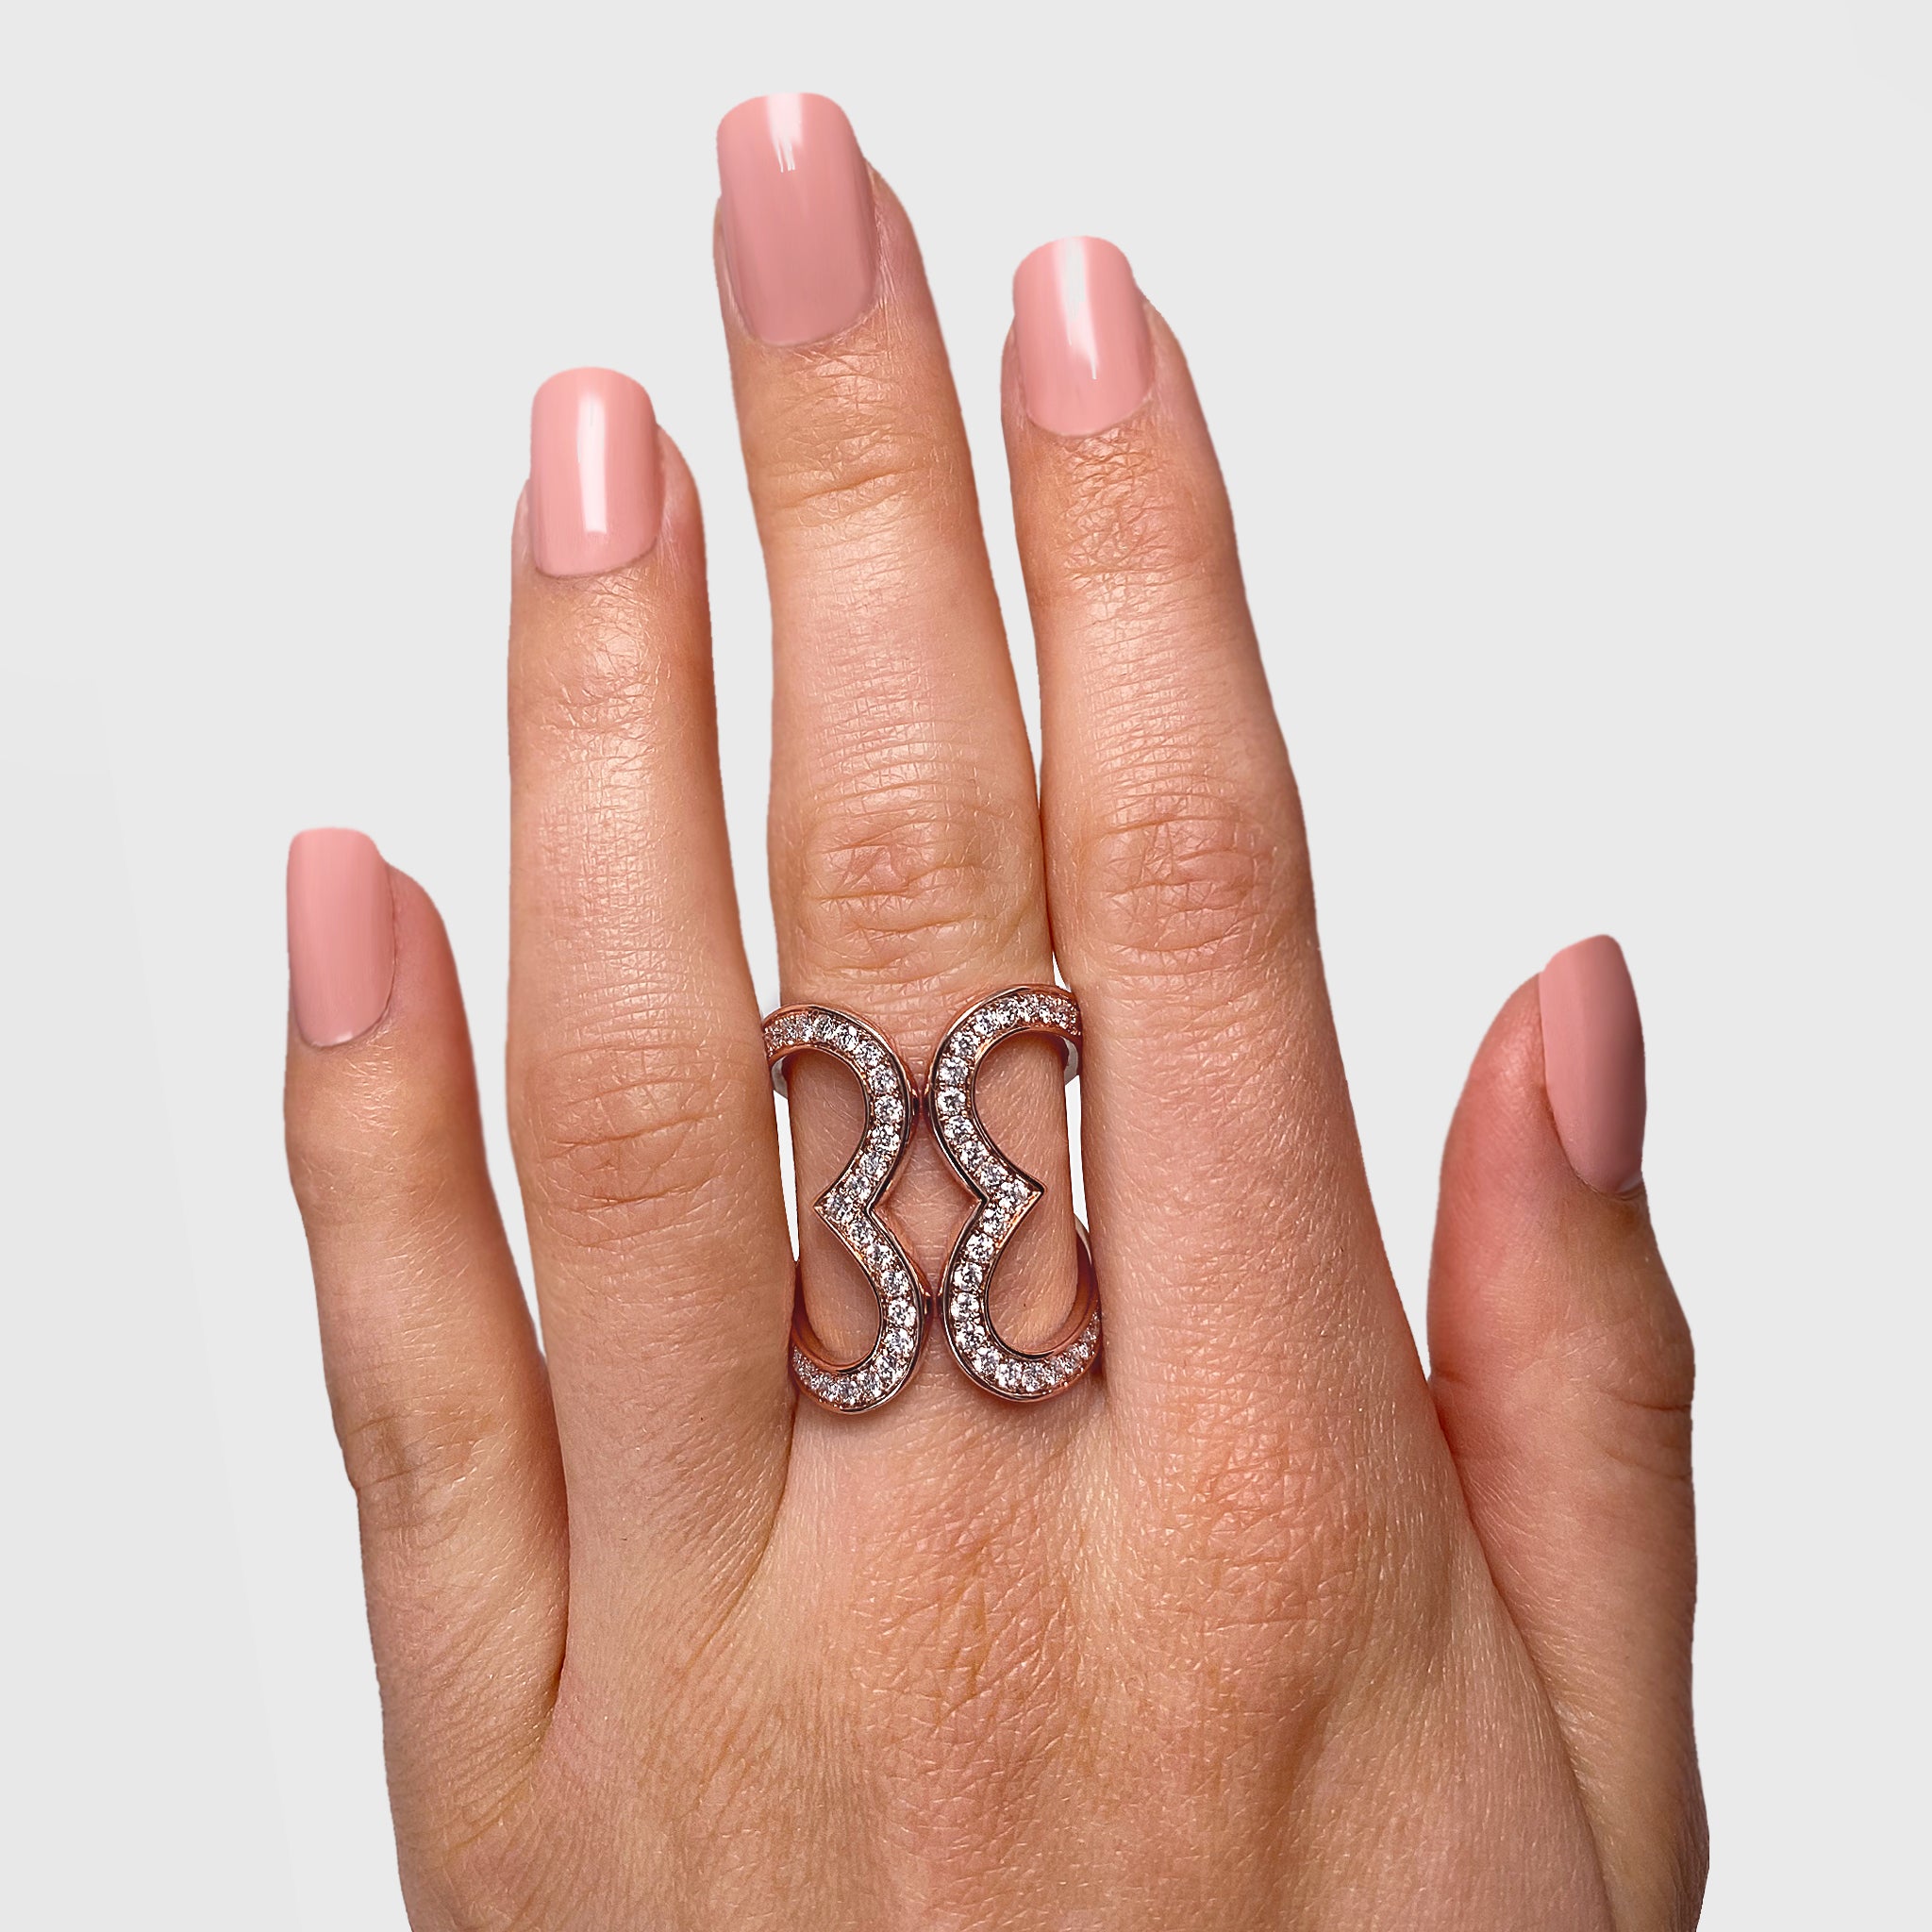 Shimansky - Women Wearing the Two Hearts Diamond Statement Ring 1.70ct crafted in 18K Rose Gold